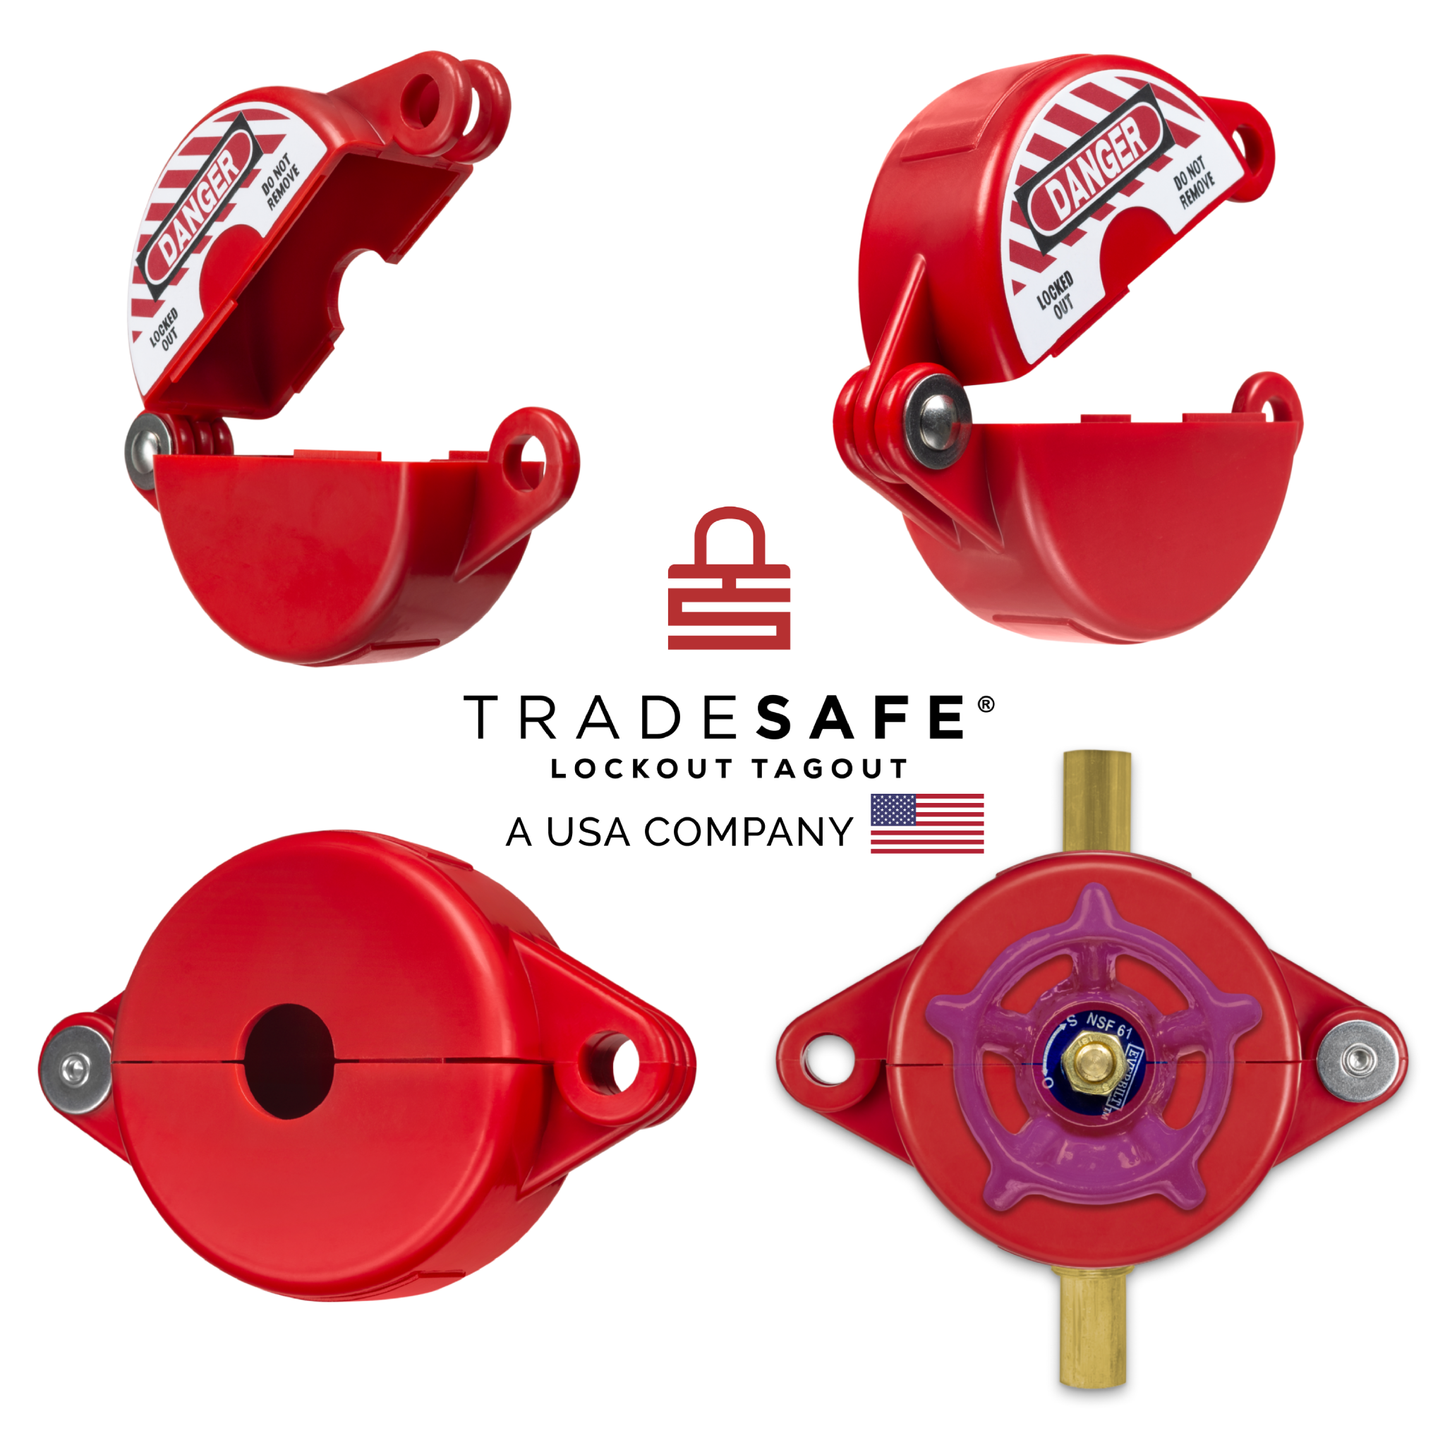 lockout tagout red gate valve showing different angles